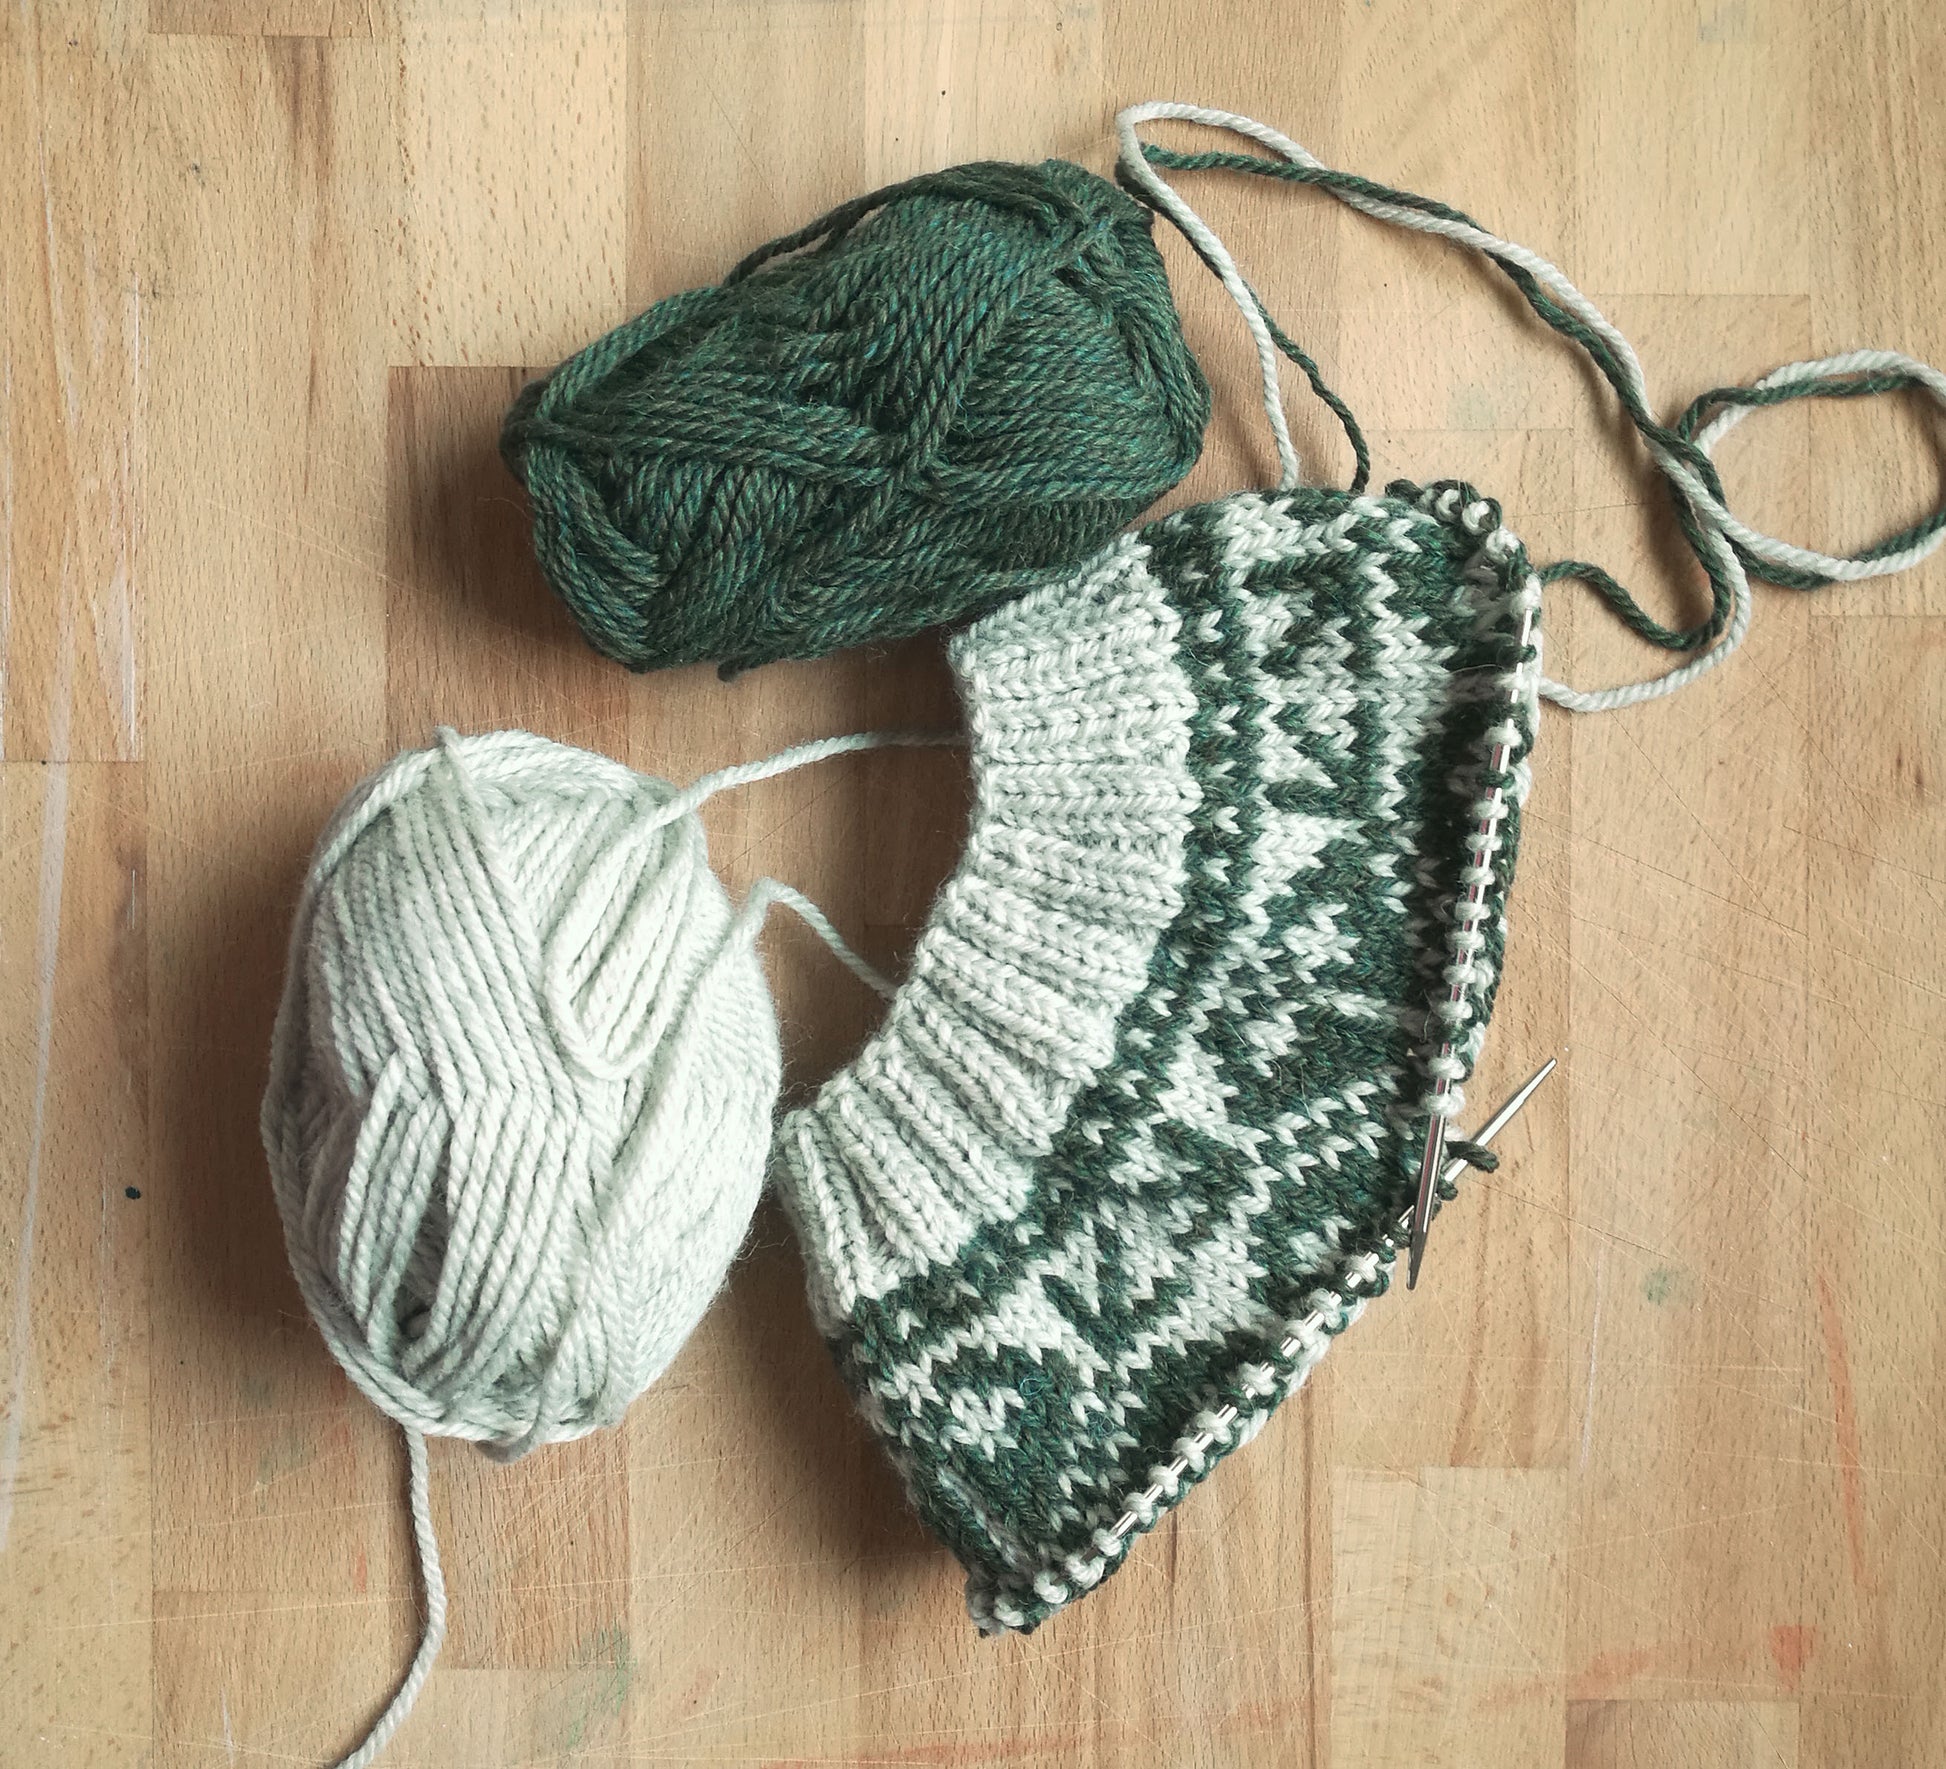 beige and green wool hand-knitted Fair Isle beanie hat in snowflake knitting pattern in progress with needles and yarn balls